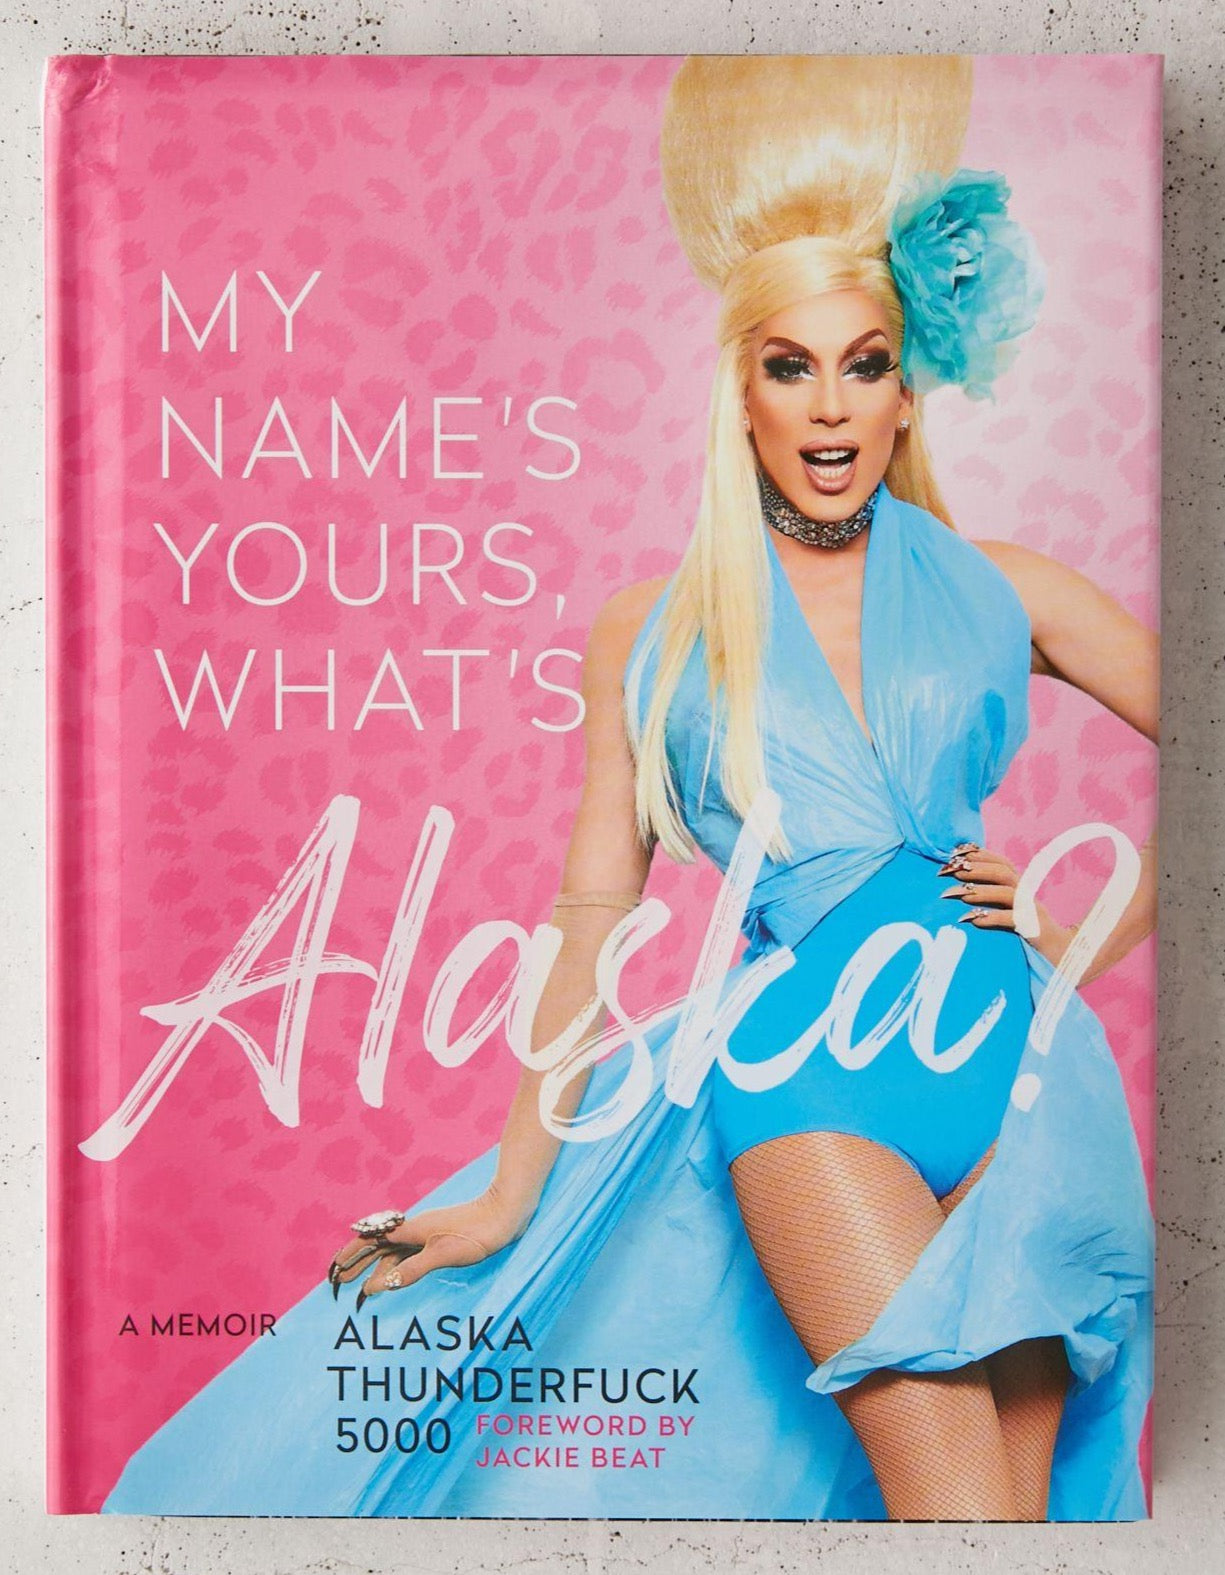 My Name's Yours, What's Alaska?